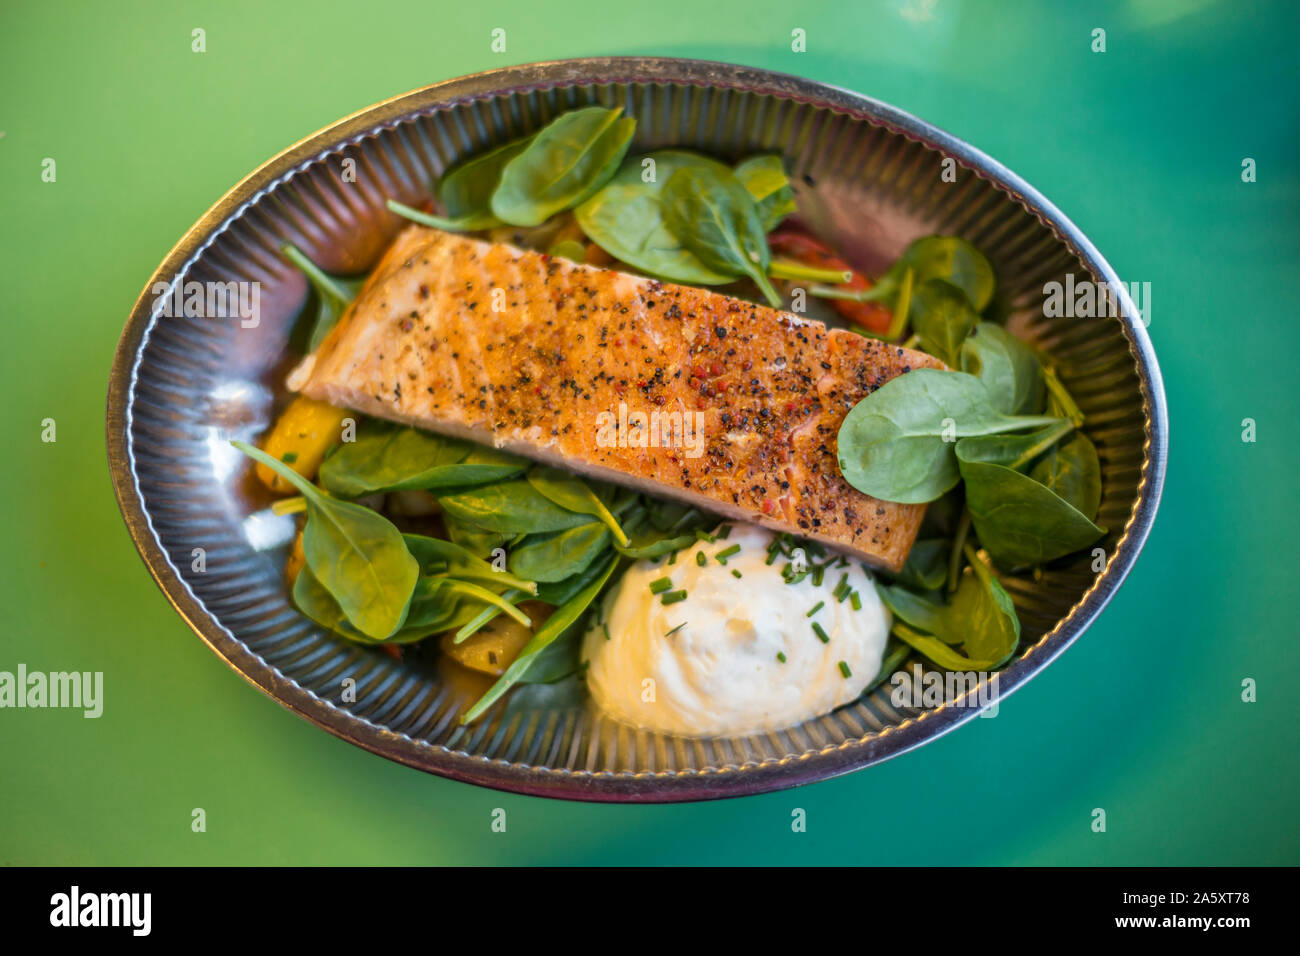 A healthy low carb meal of grilled salmon,  baby spinach leaves and yoghurt sauce in a metallic bowl. Green background, from above perspective. Stock Photo